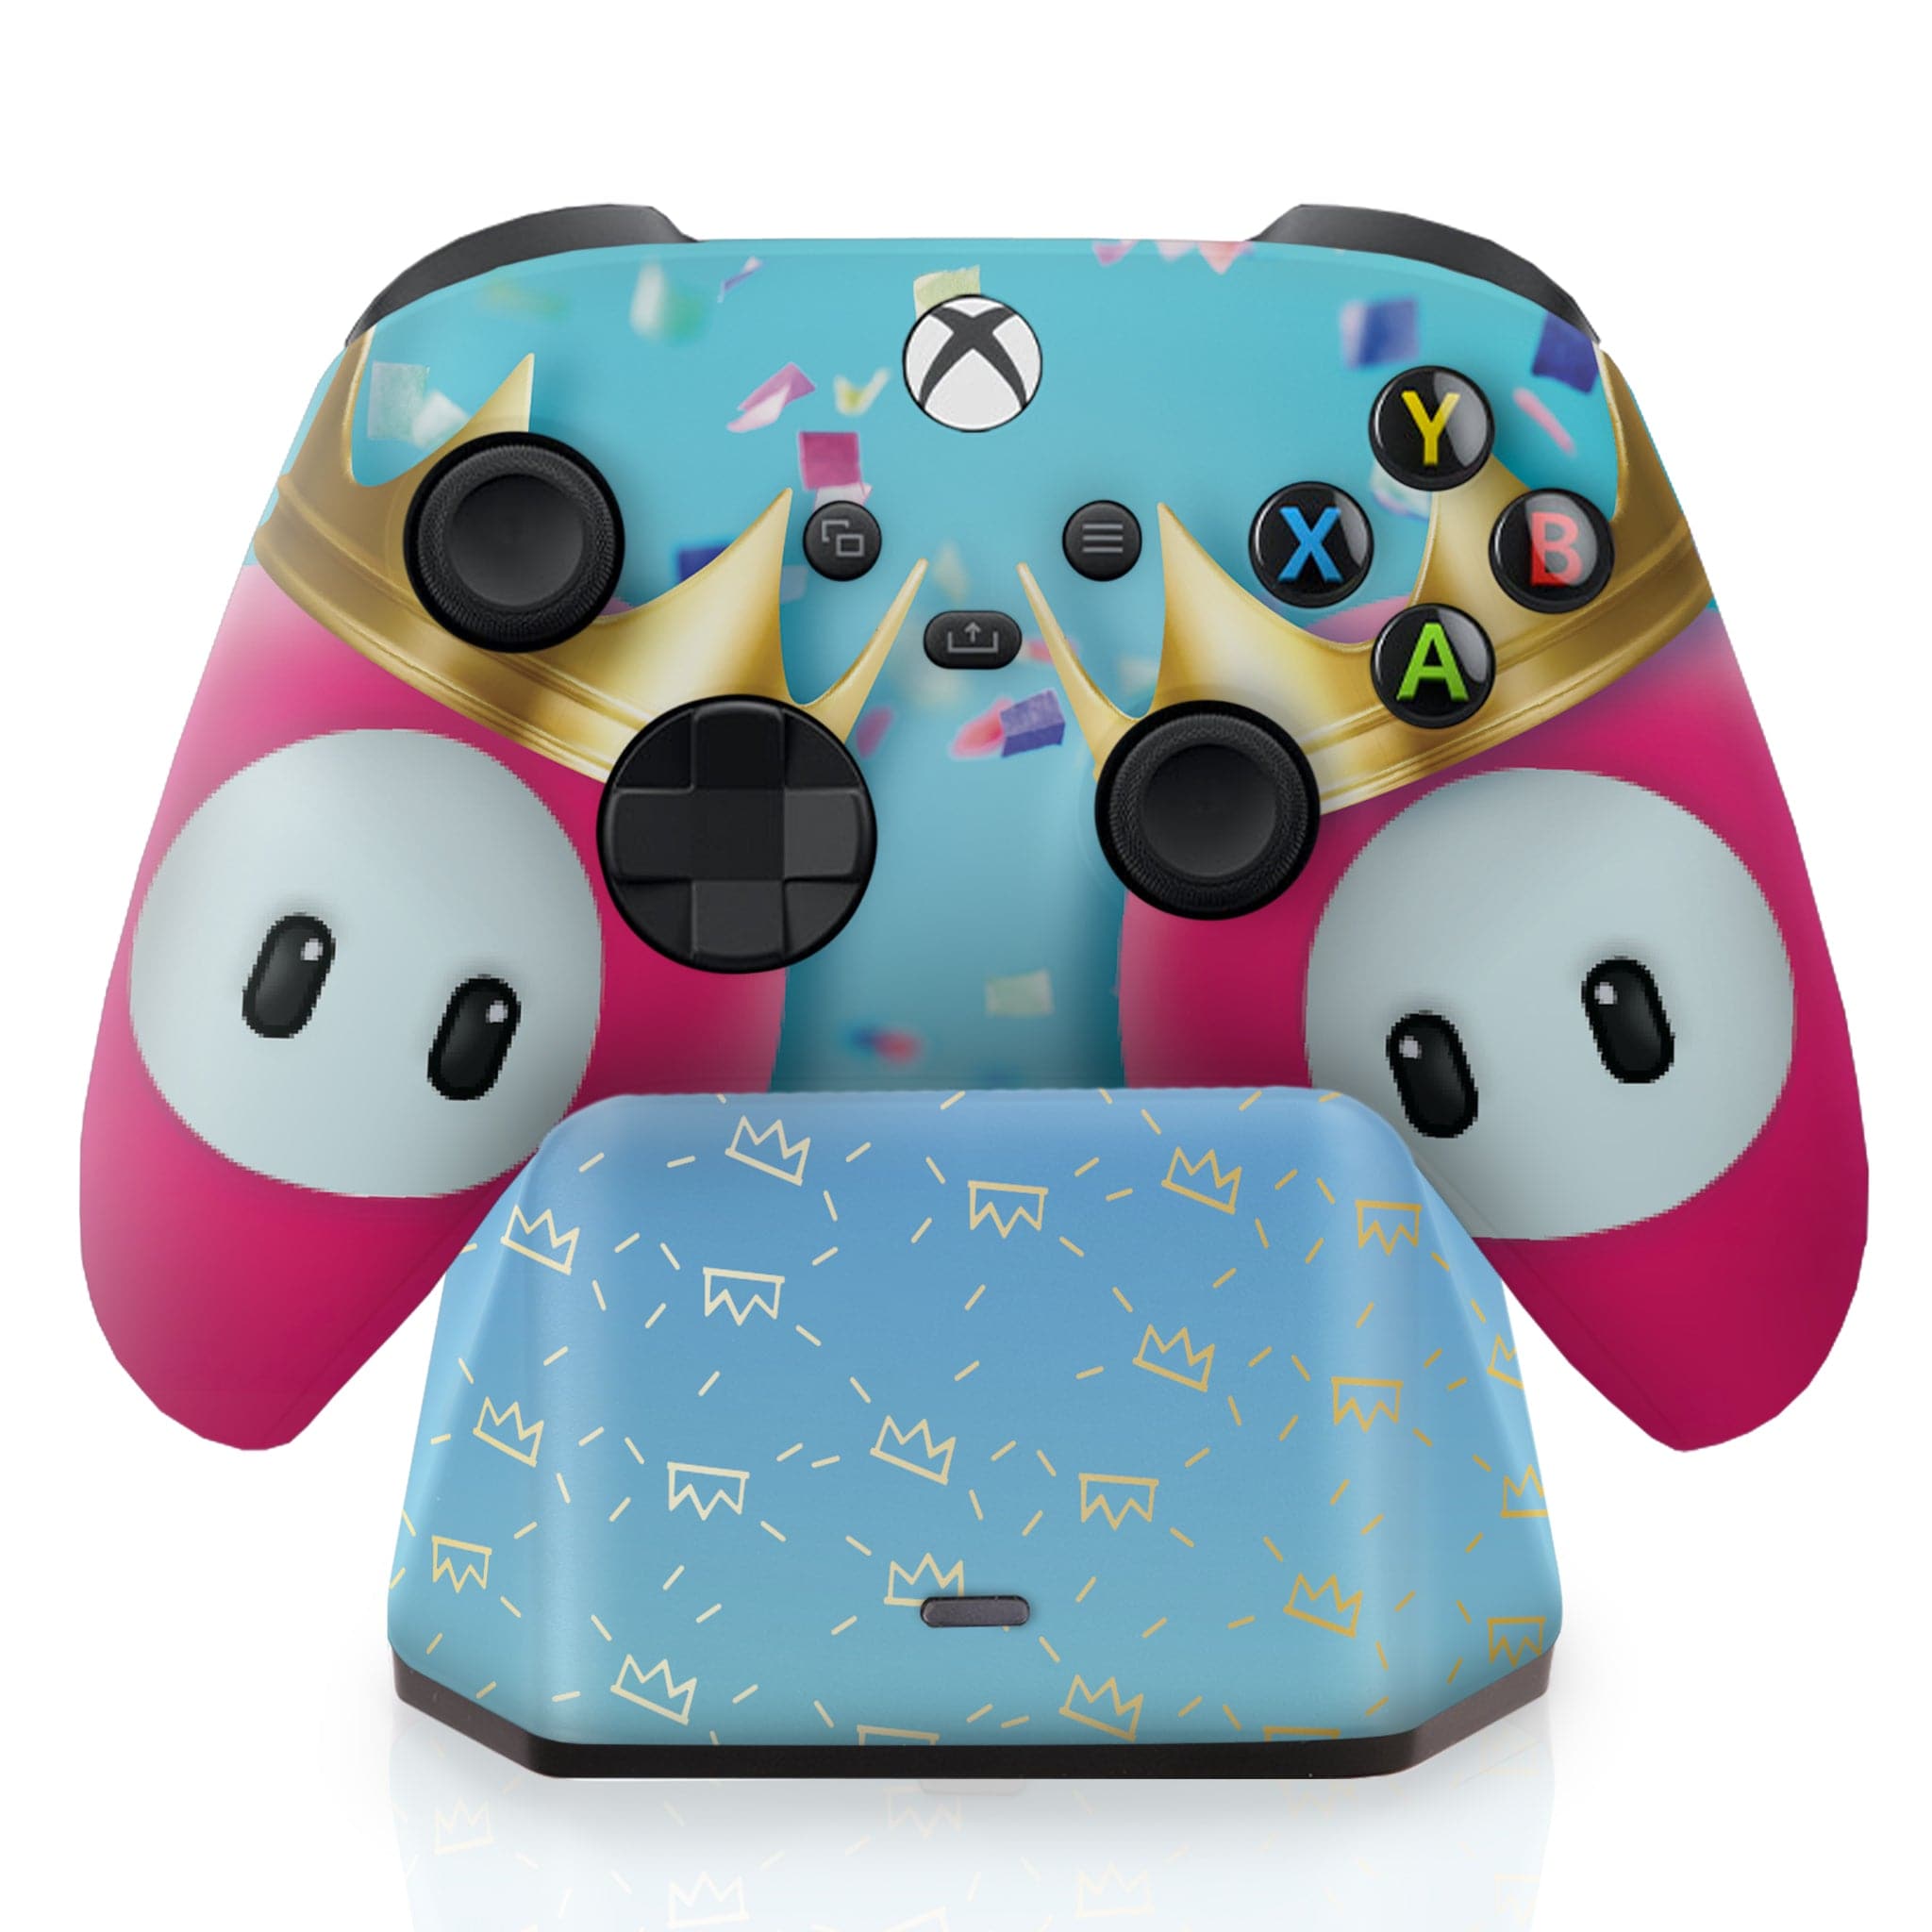 Fall Guy Xbox Series X Controller with Charging Station